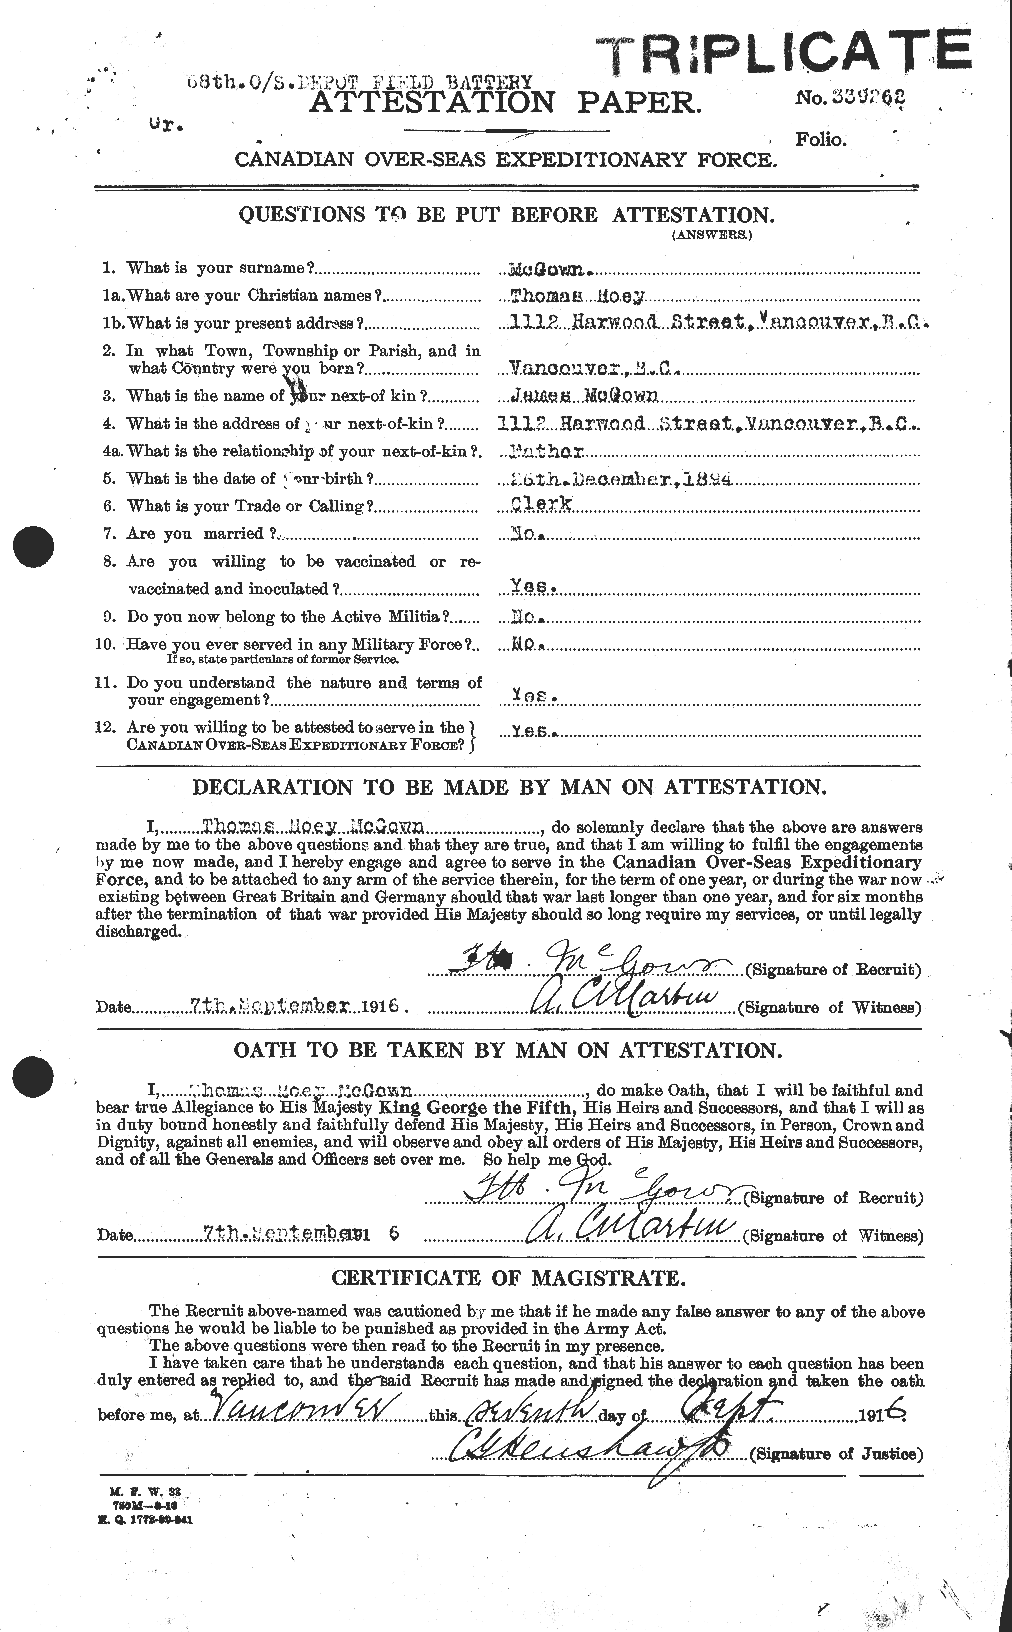 Personnel Records of the First World War - CEF 523258a